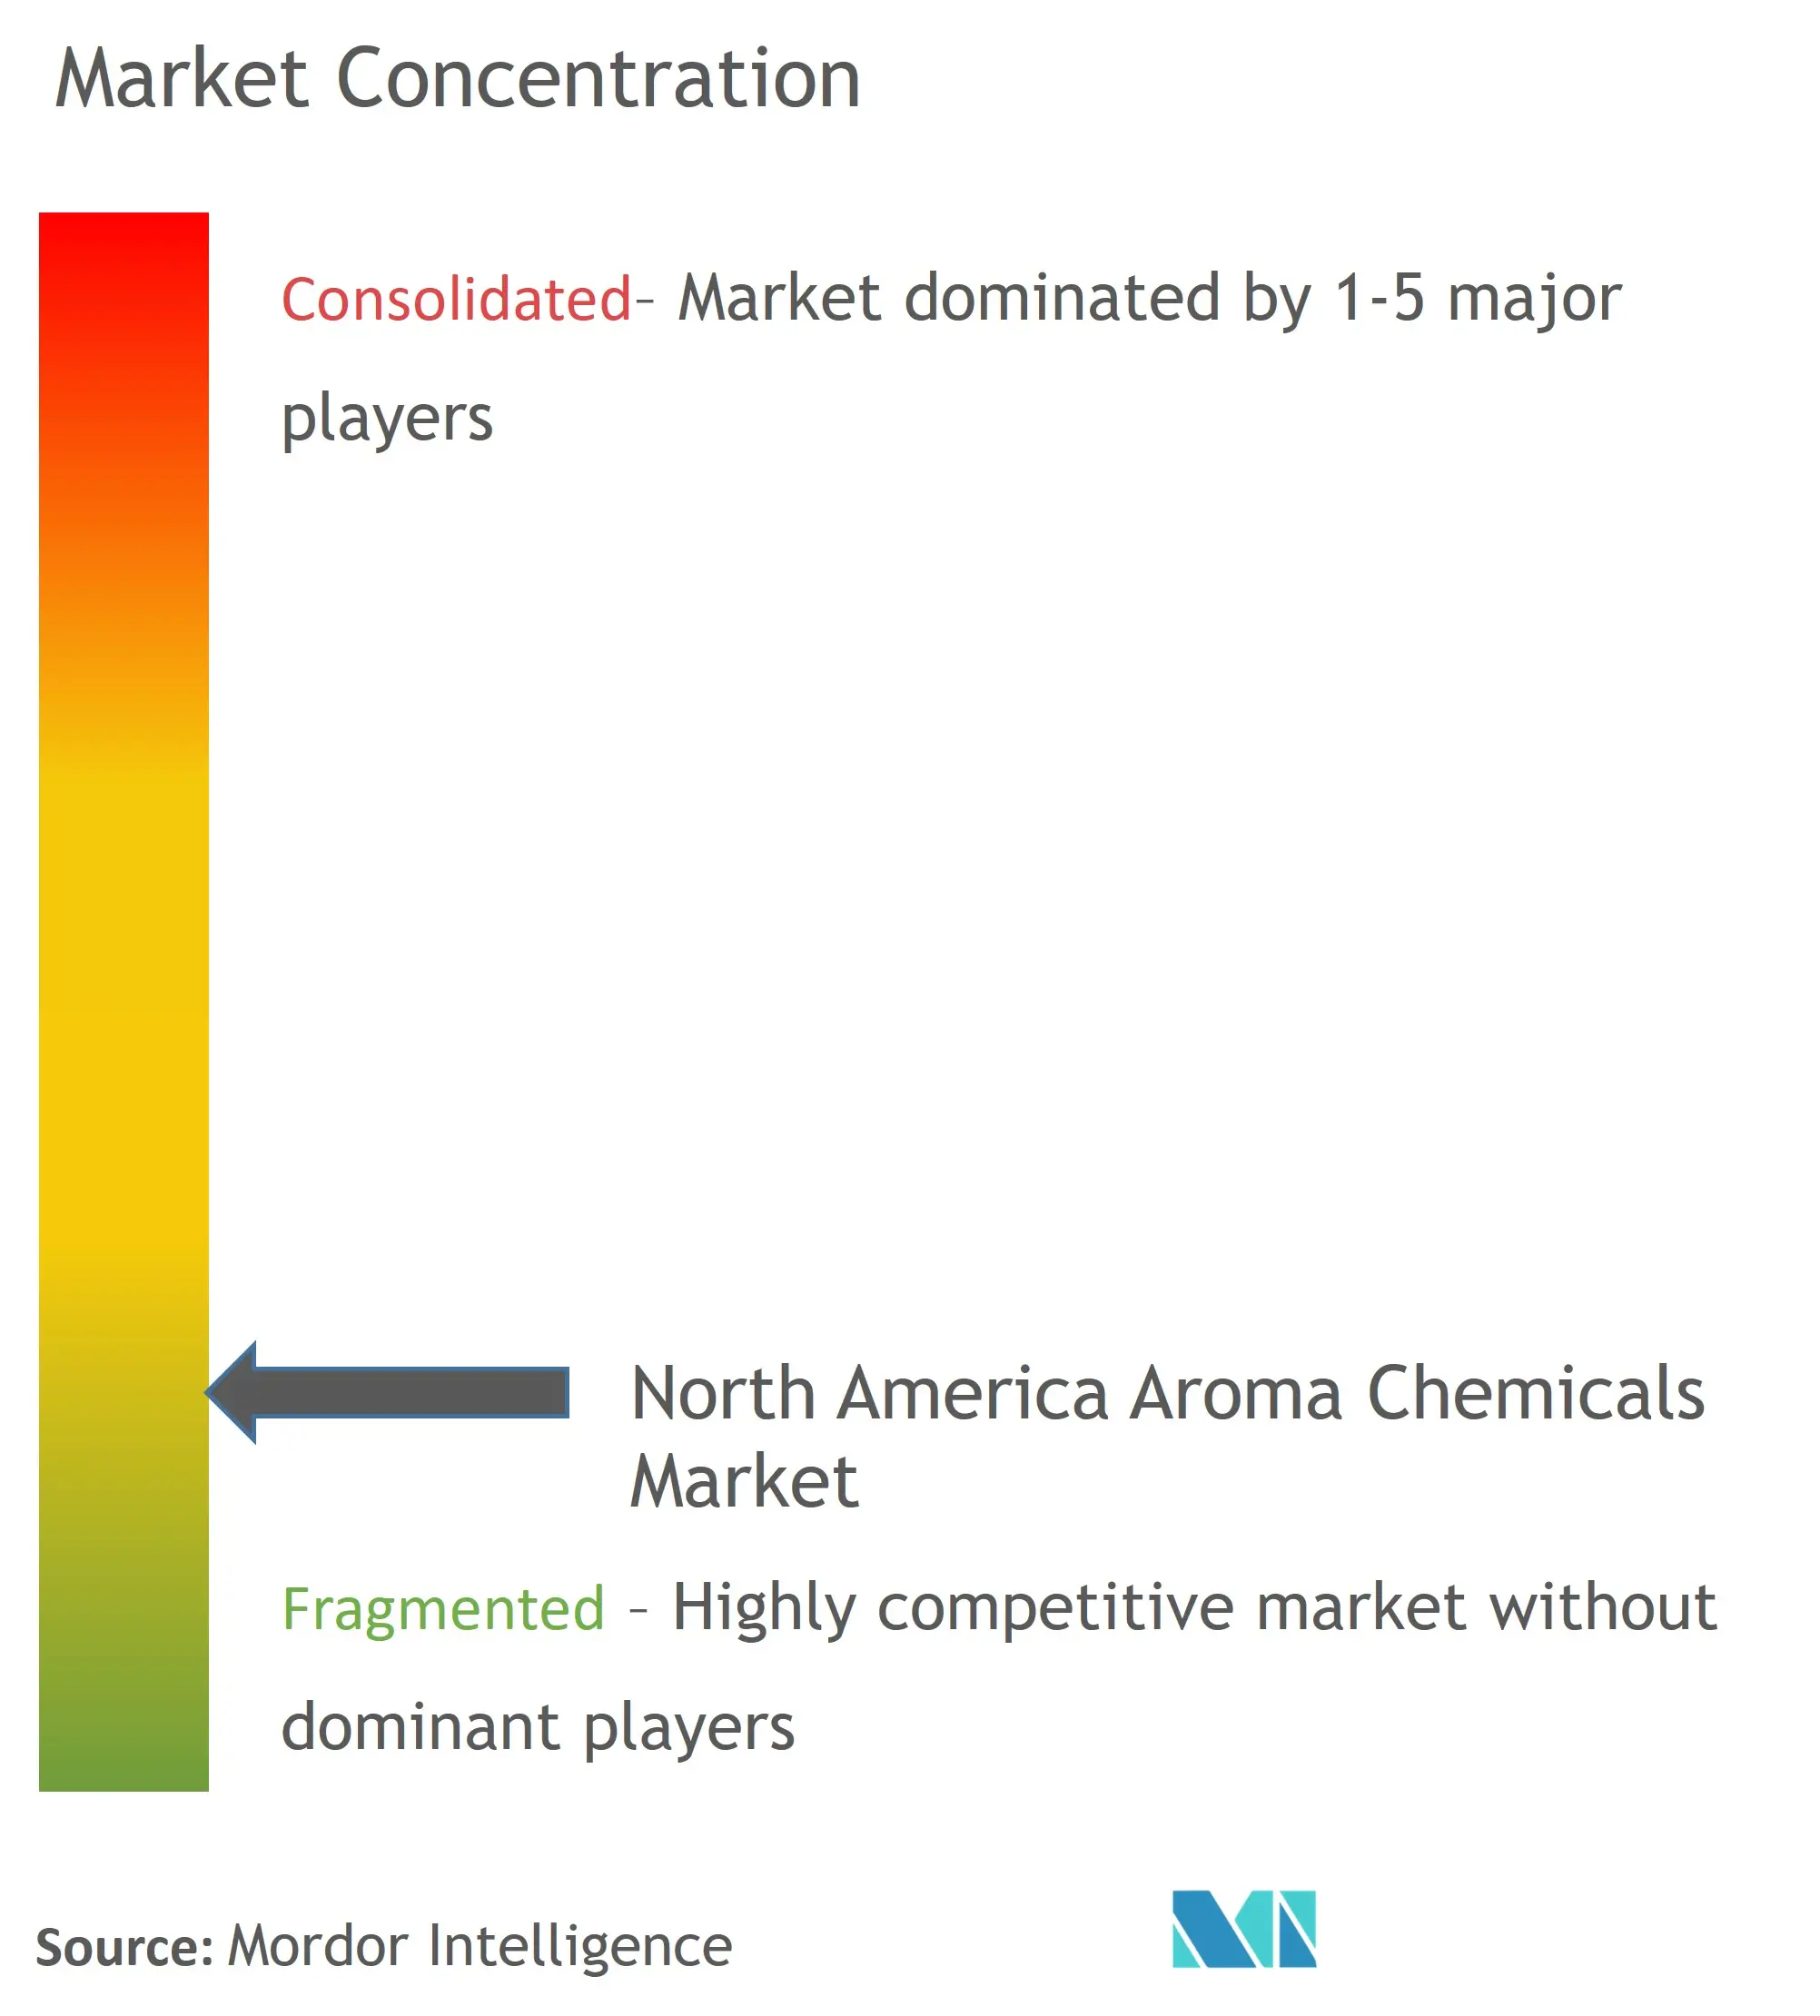 North America Aroma Chemicals Concentration